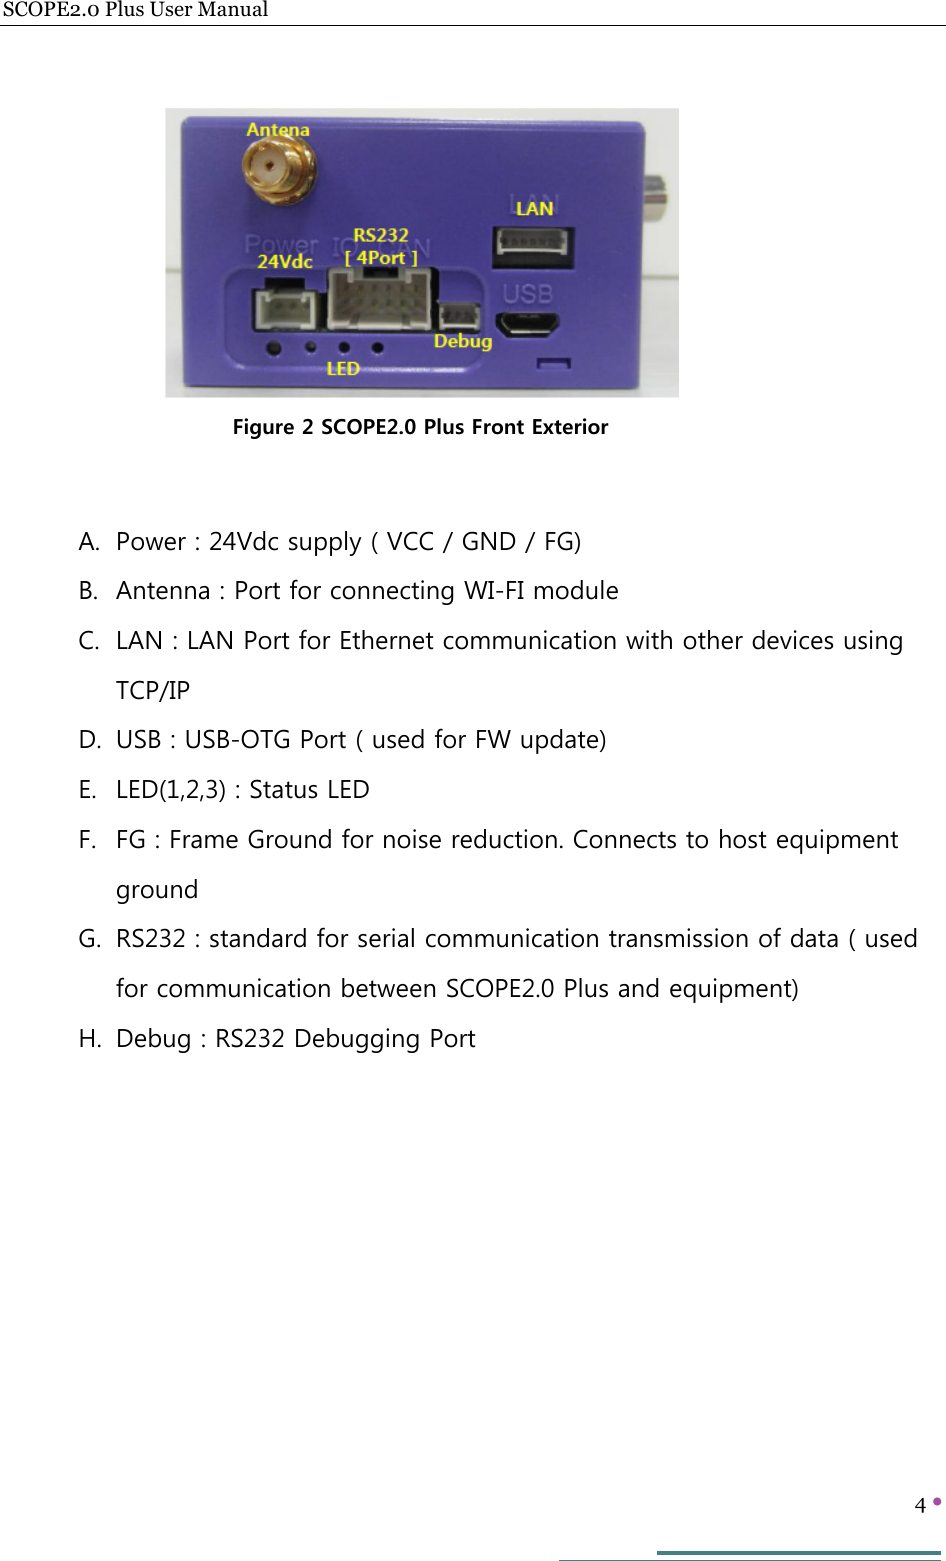 SCOPE2.0 Plus User Manual   4           A. Power : 24Vdc supply ( VCC / GND / FG) B. Antenna : Port for connecting WI-FI module C. LAN : LAN Port for Ethernet communication with other devices using TCP/IP D. USB : USB-OTG Port ( used for FW update) E. LED(1,2,3) : Status LED F. FG : Frame Ground for noise reduction. Connects to host equipment ground G. RS232 : standard for serial communication transmission of data ( used for communication between SCOPE2.0 Plus and equipment) H. Debug : RS232 Debugging Port      Figure 2 SCOPE2.0 Plus Front Exterior 